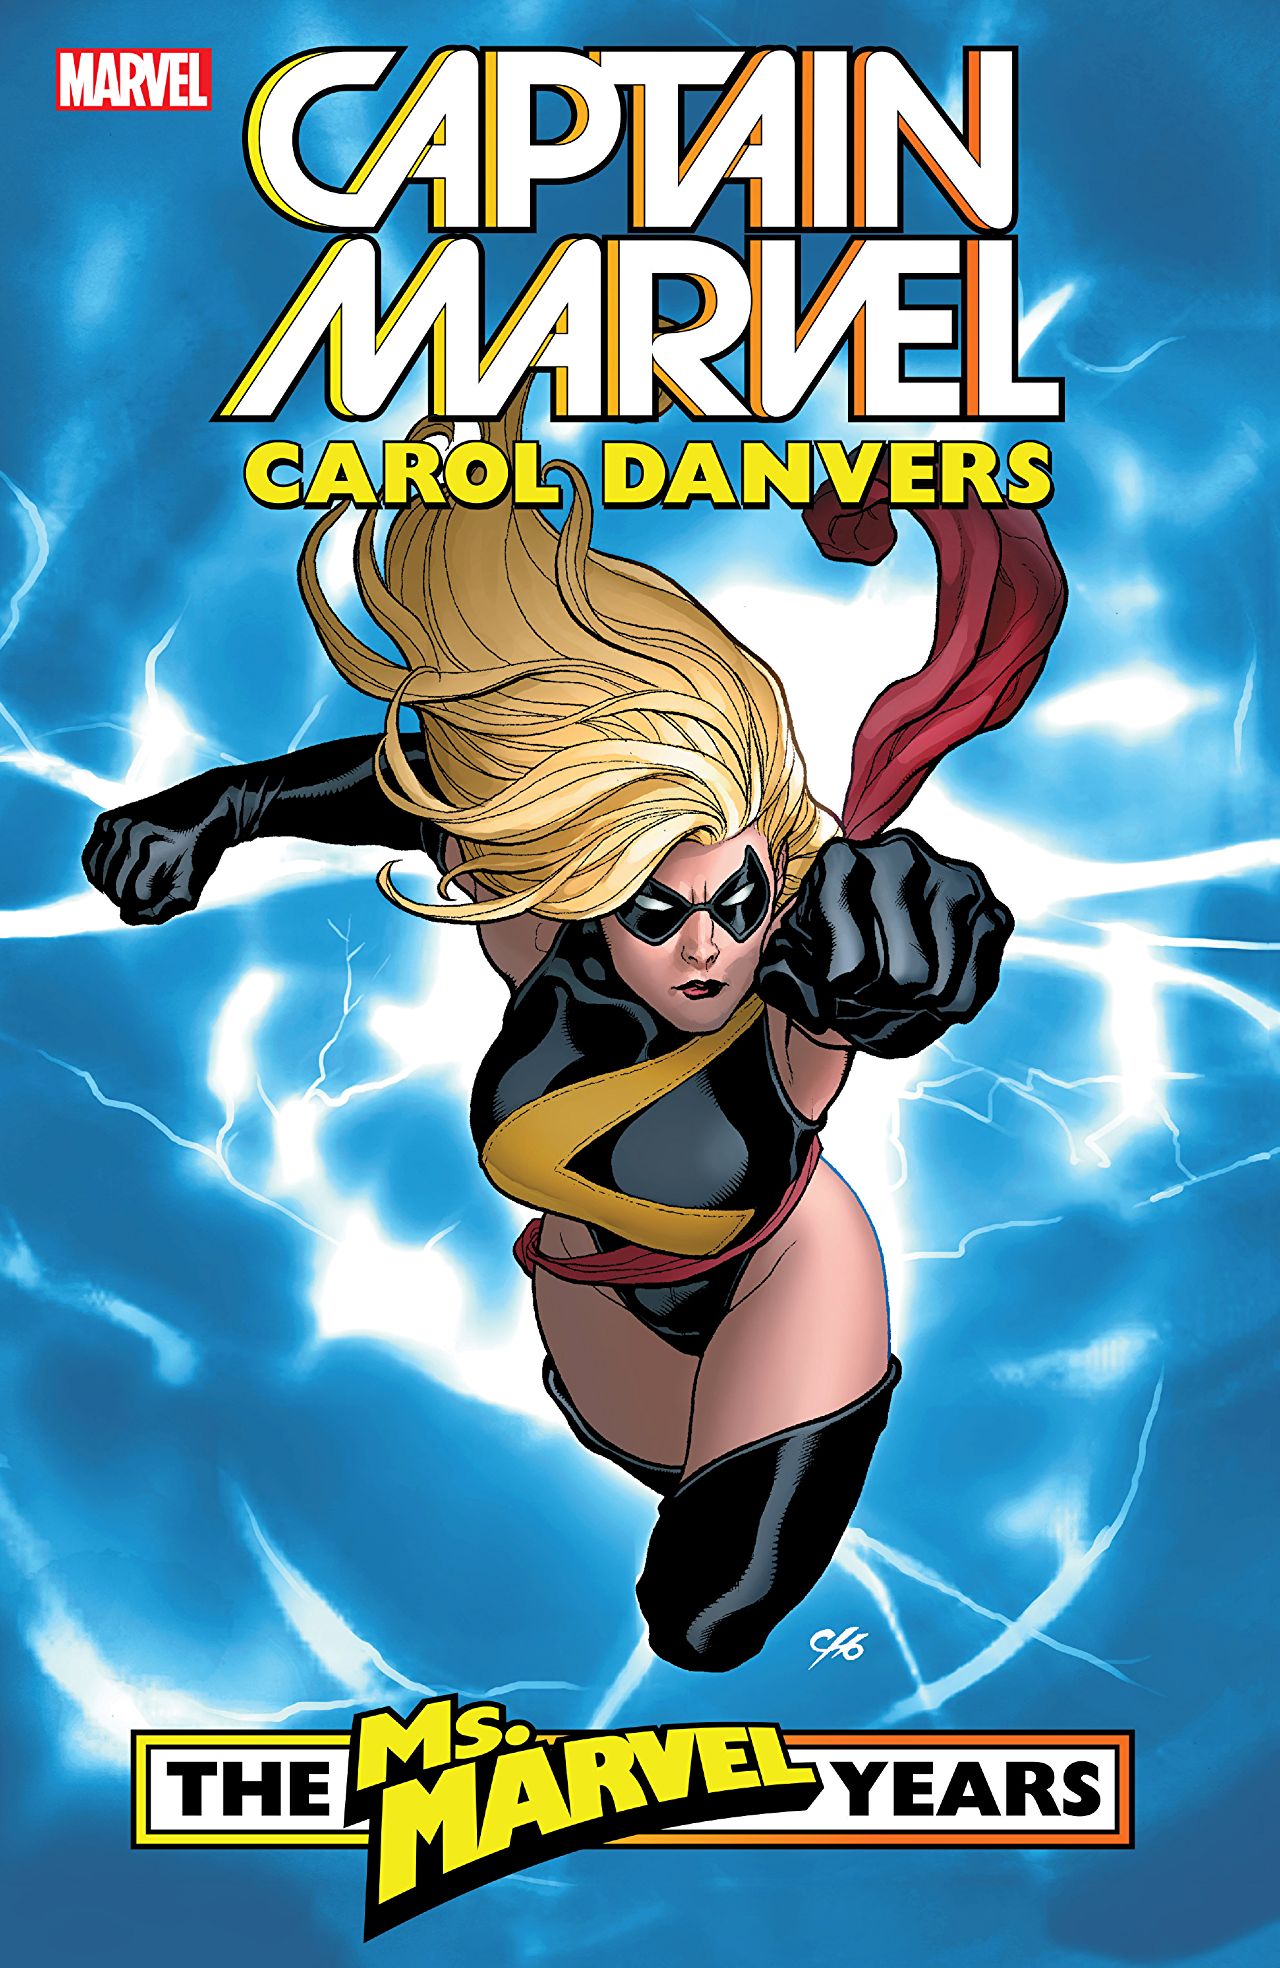 Captain Marvel: Carol Danvers: The Ms. Marvel Years Vol. 1 review: A great introduction to Carol and her innermost struggles